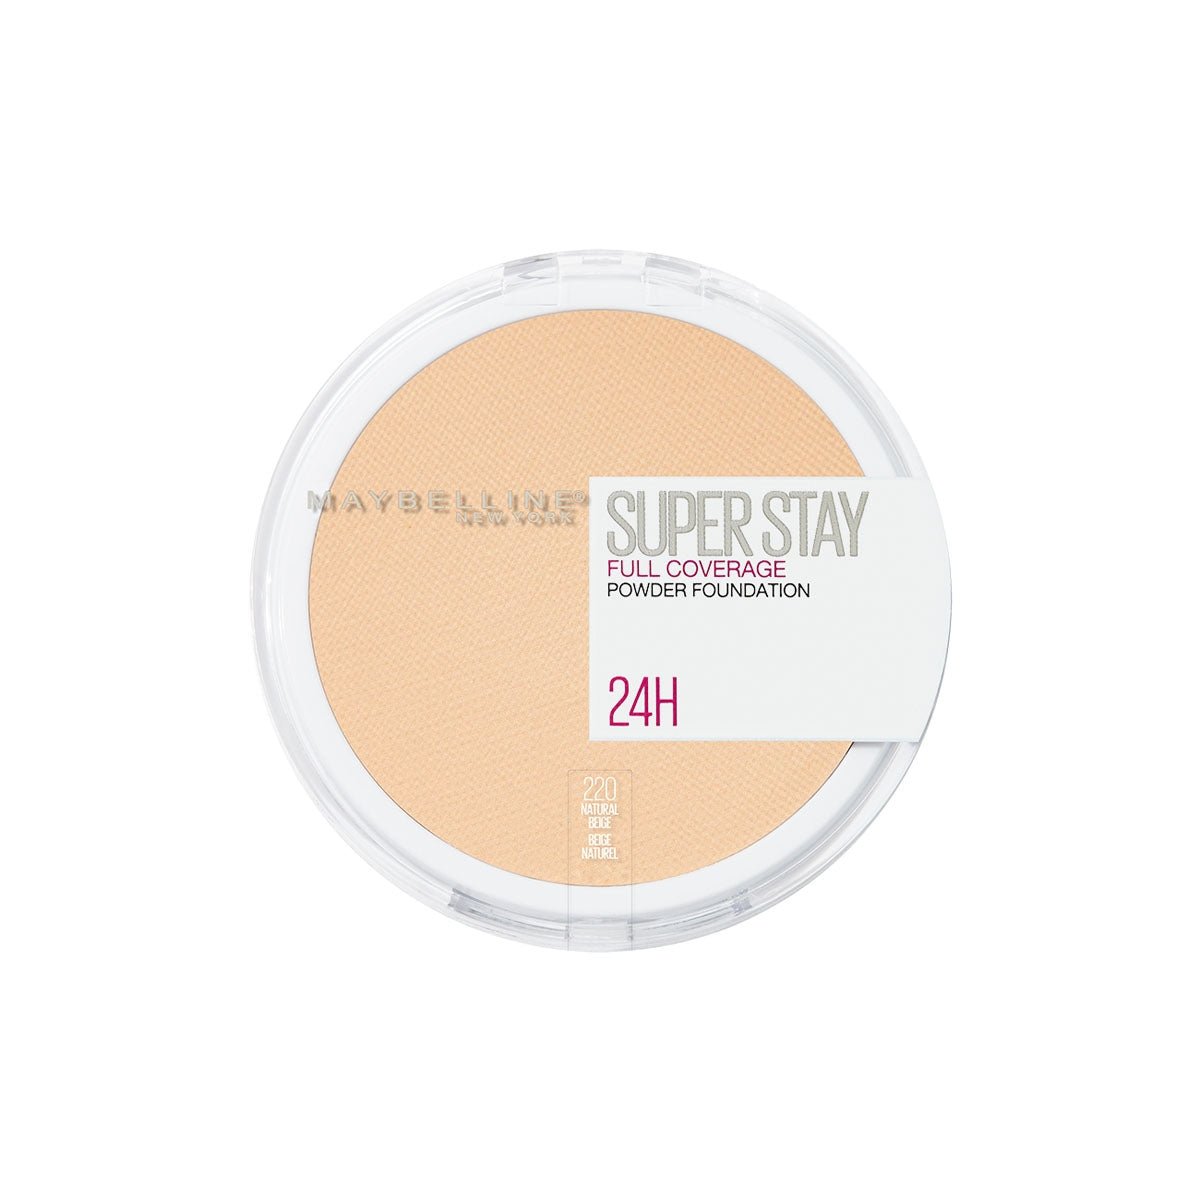 Maybelline SuperStay Full Coverage Powder Foundation - AllurebeautypkMaybelline SuperStay Full Coverage Powder Foundation